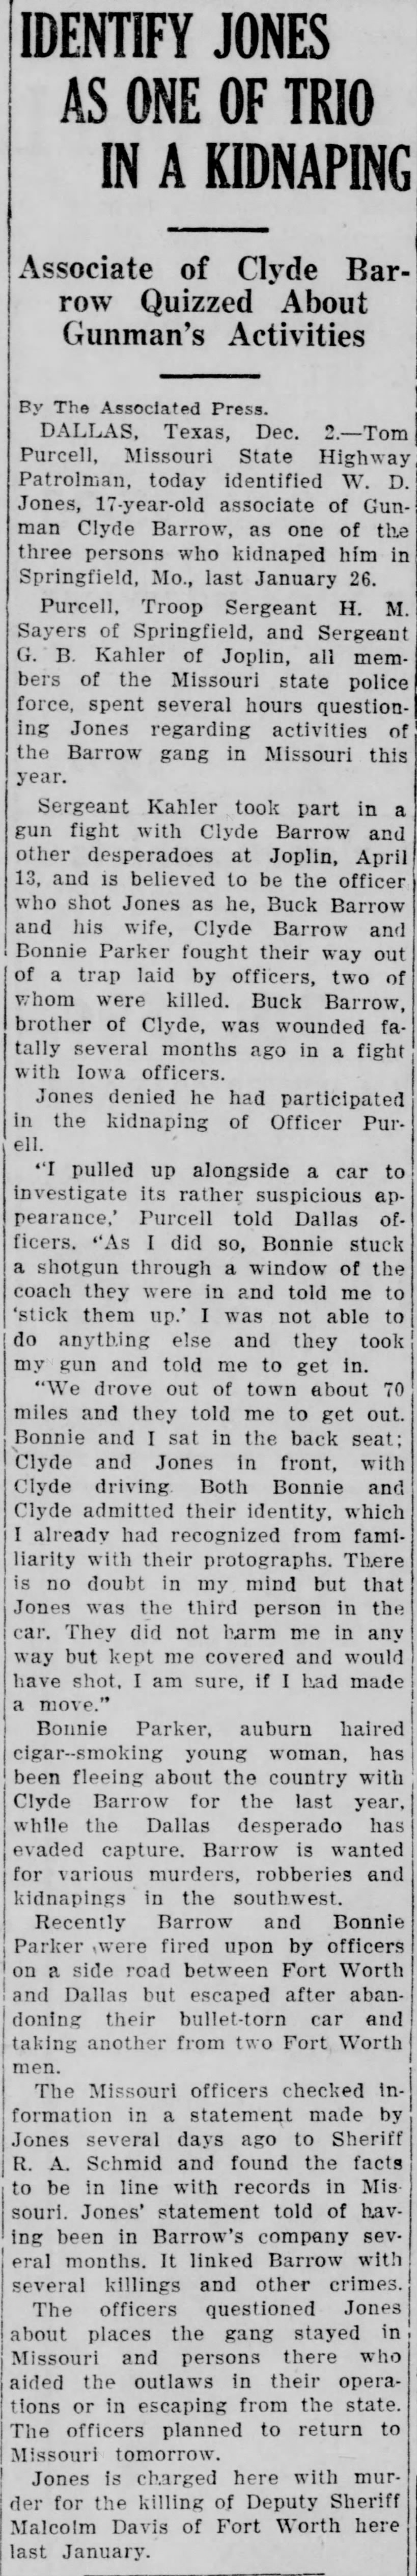 Associate of Bonnie and Clyde accused of kidnapping a highway patrolman in December 1933